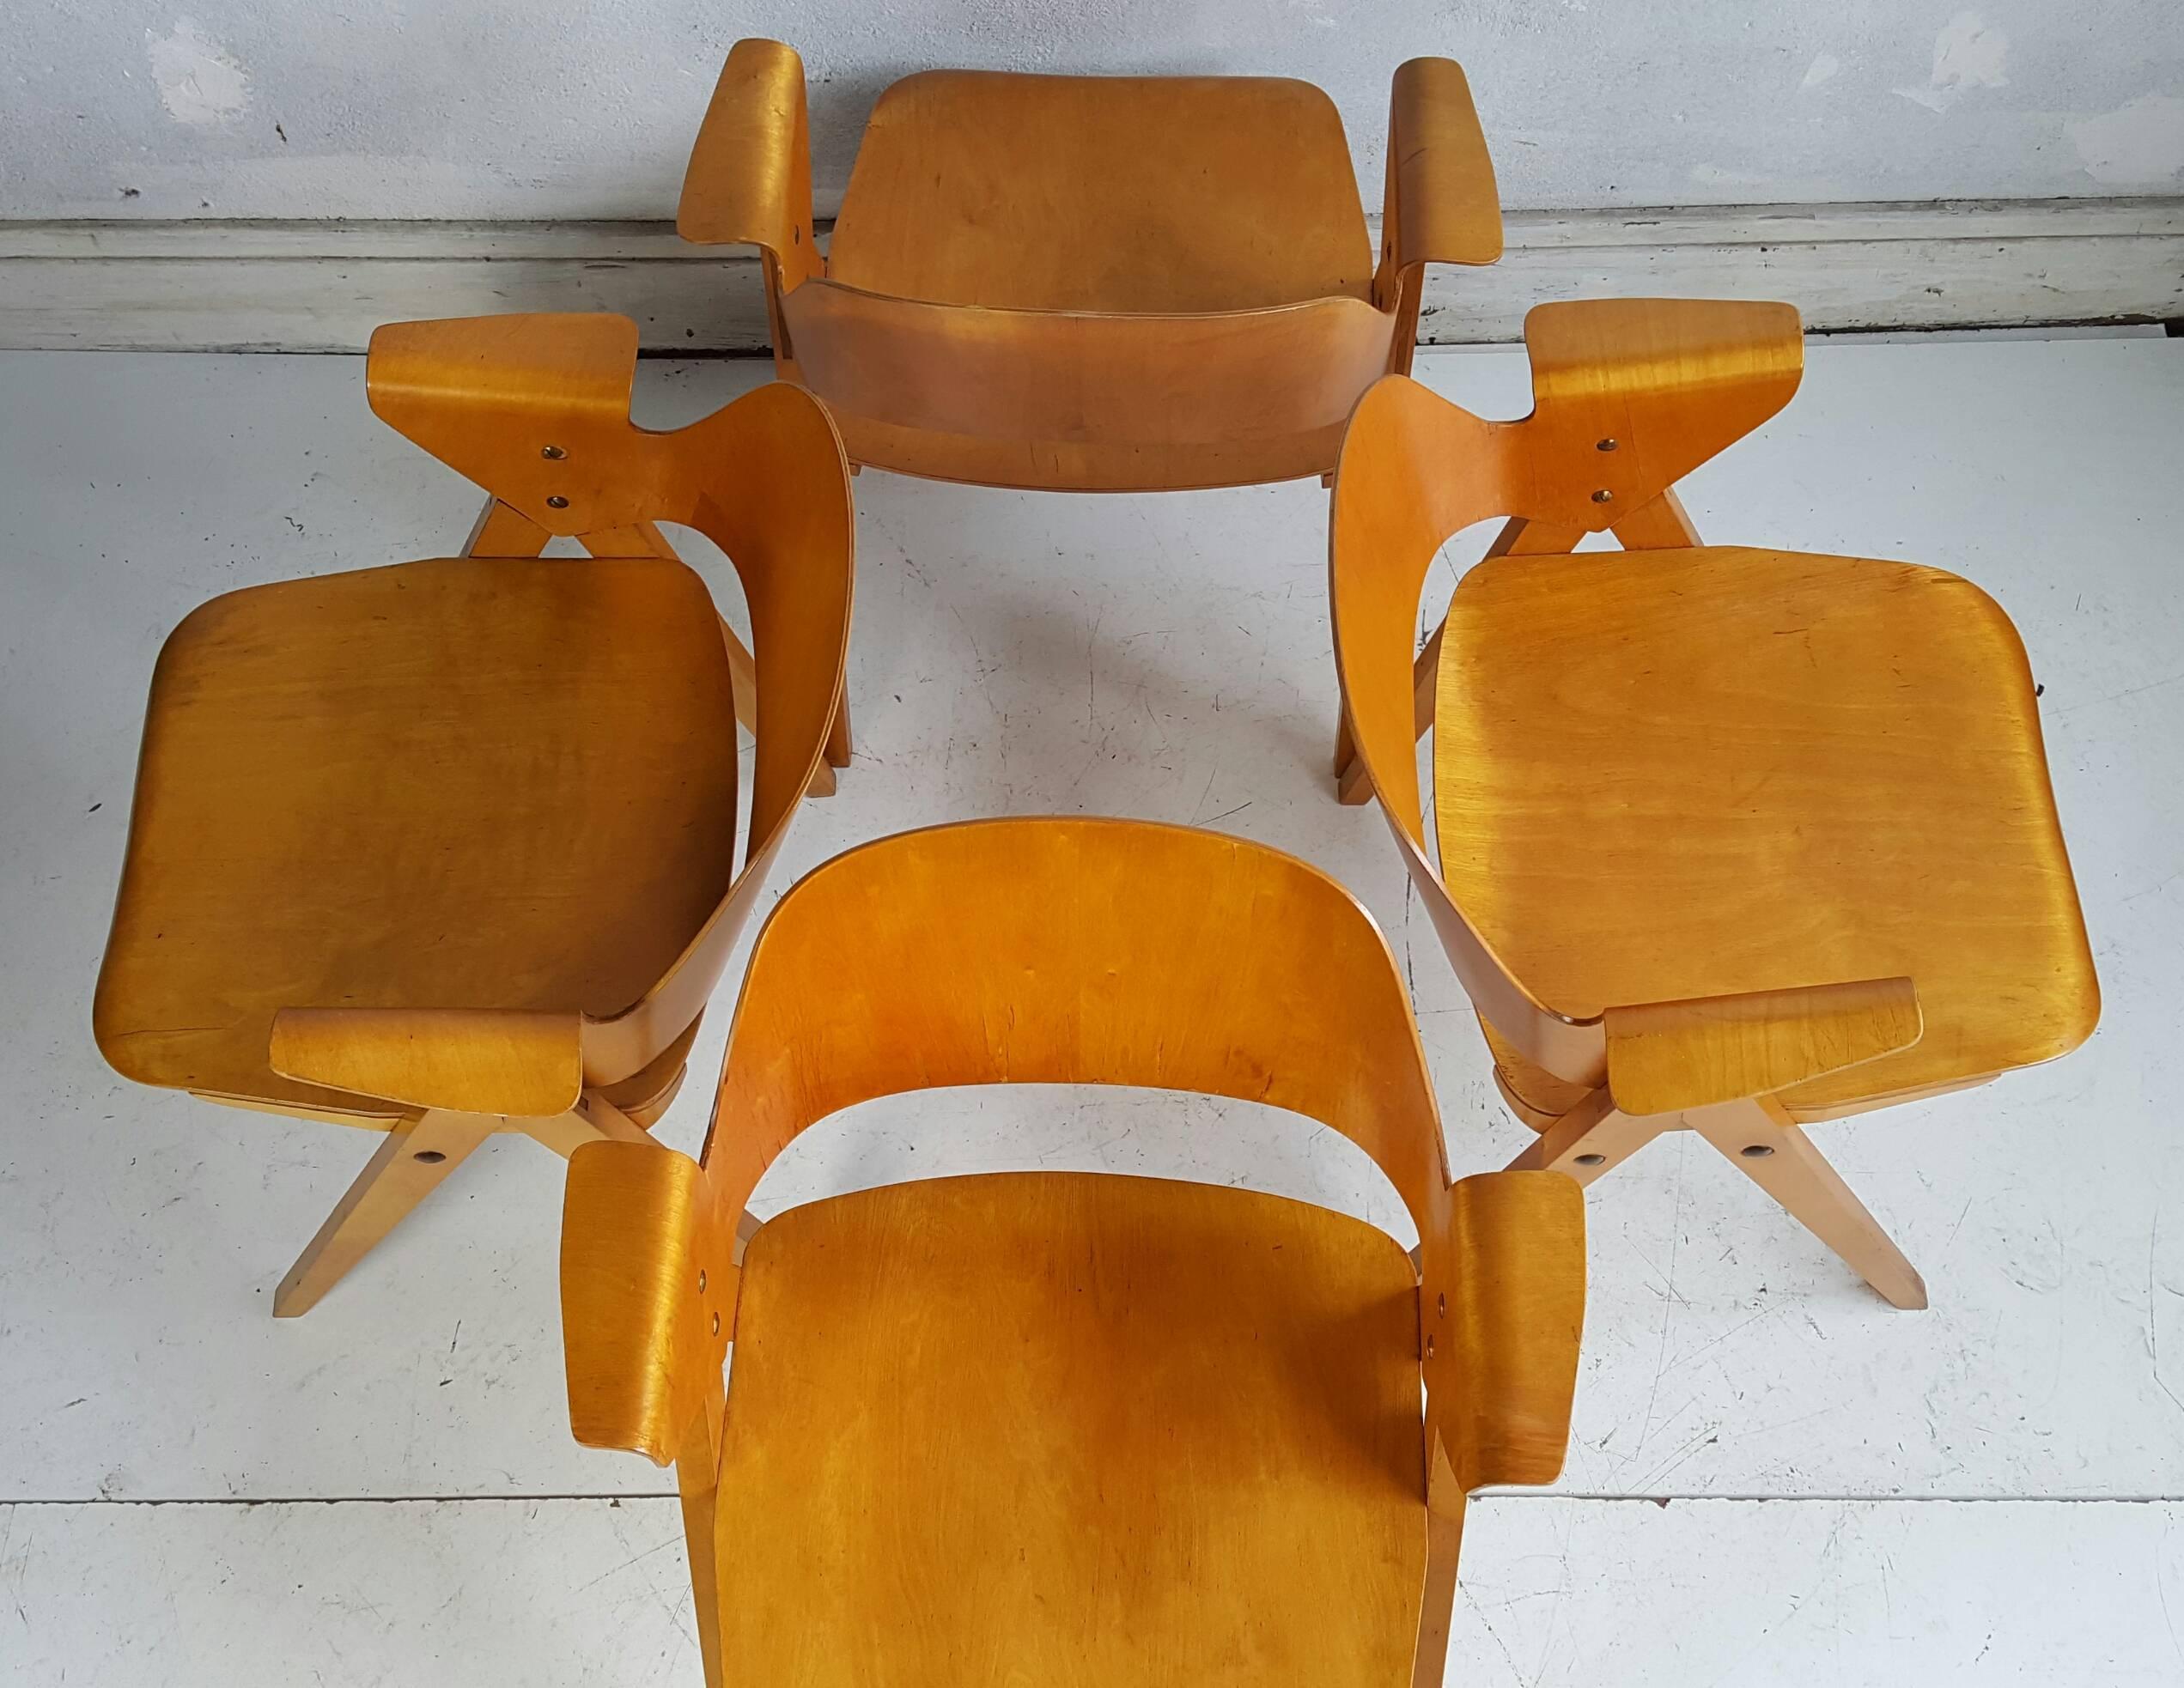 Set of four bent, molded plywood armchairs designed by Elias Svedberg for Nordiska Konipaniet, Sweden. Classic Eames-like styling. Extremely rare, made in limited numbers for only a few years.